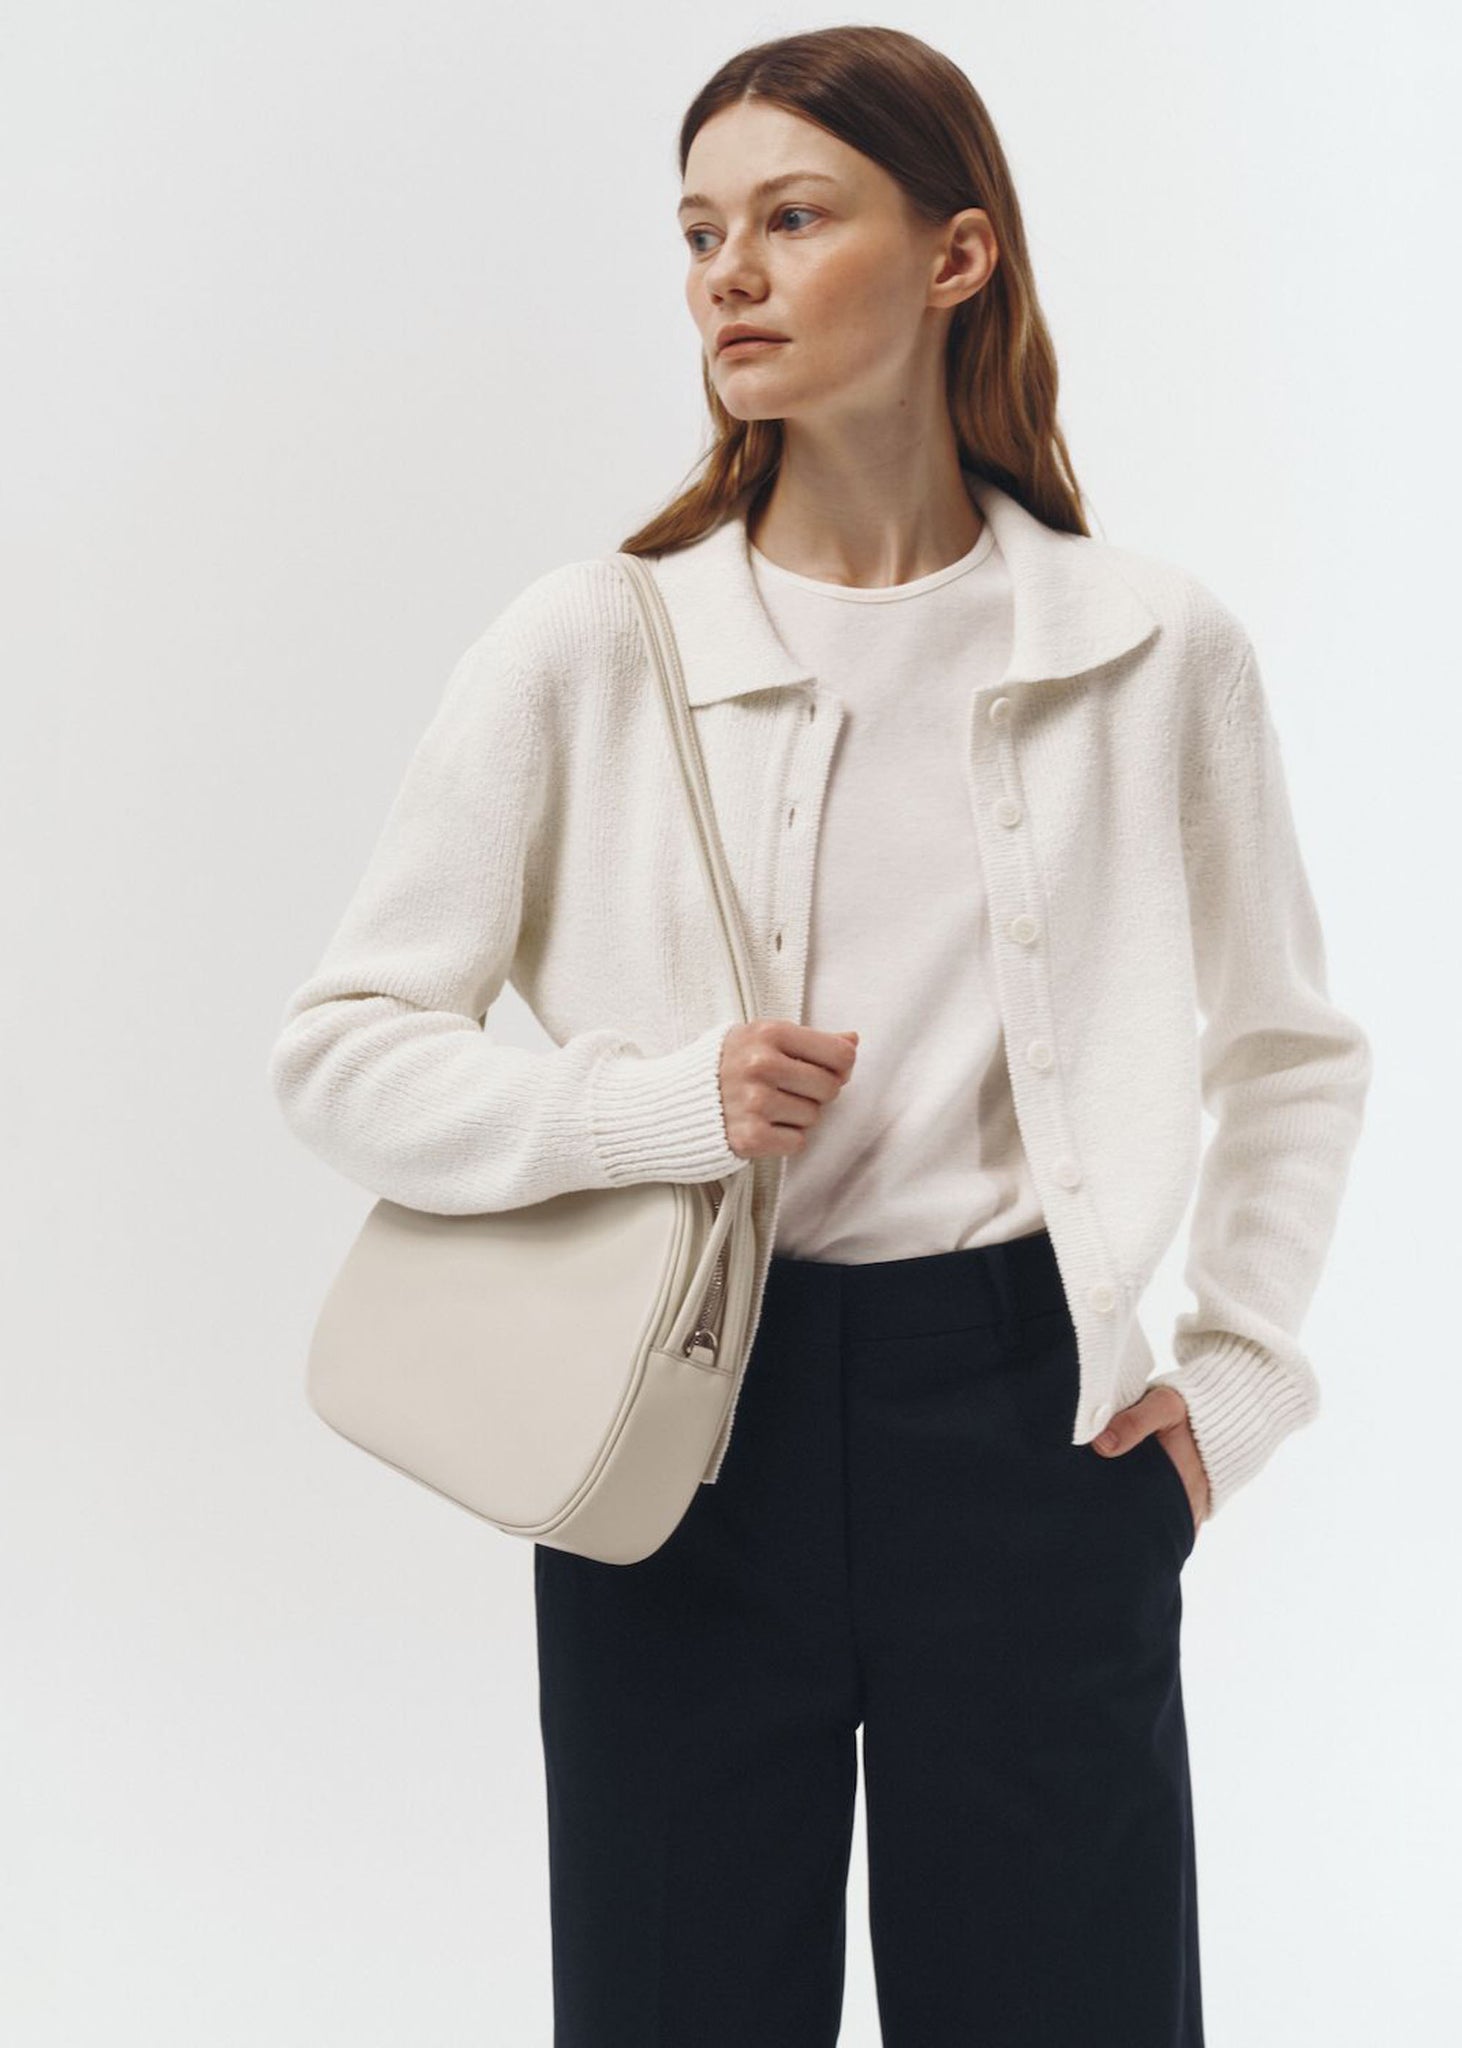 White Classic Leather Shoulder Bag